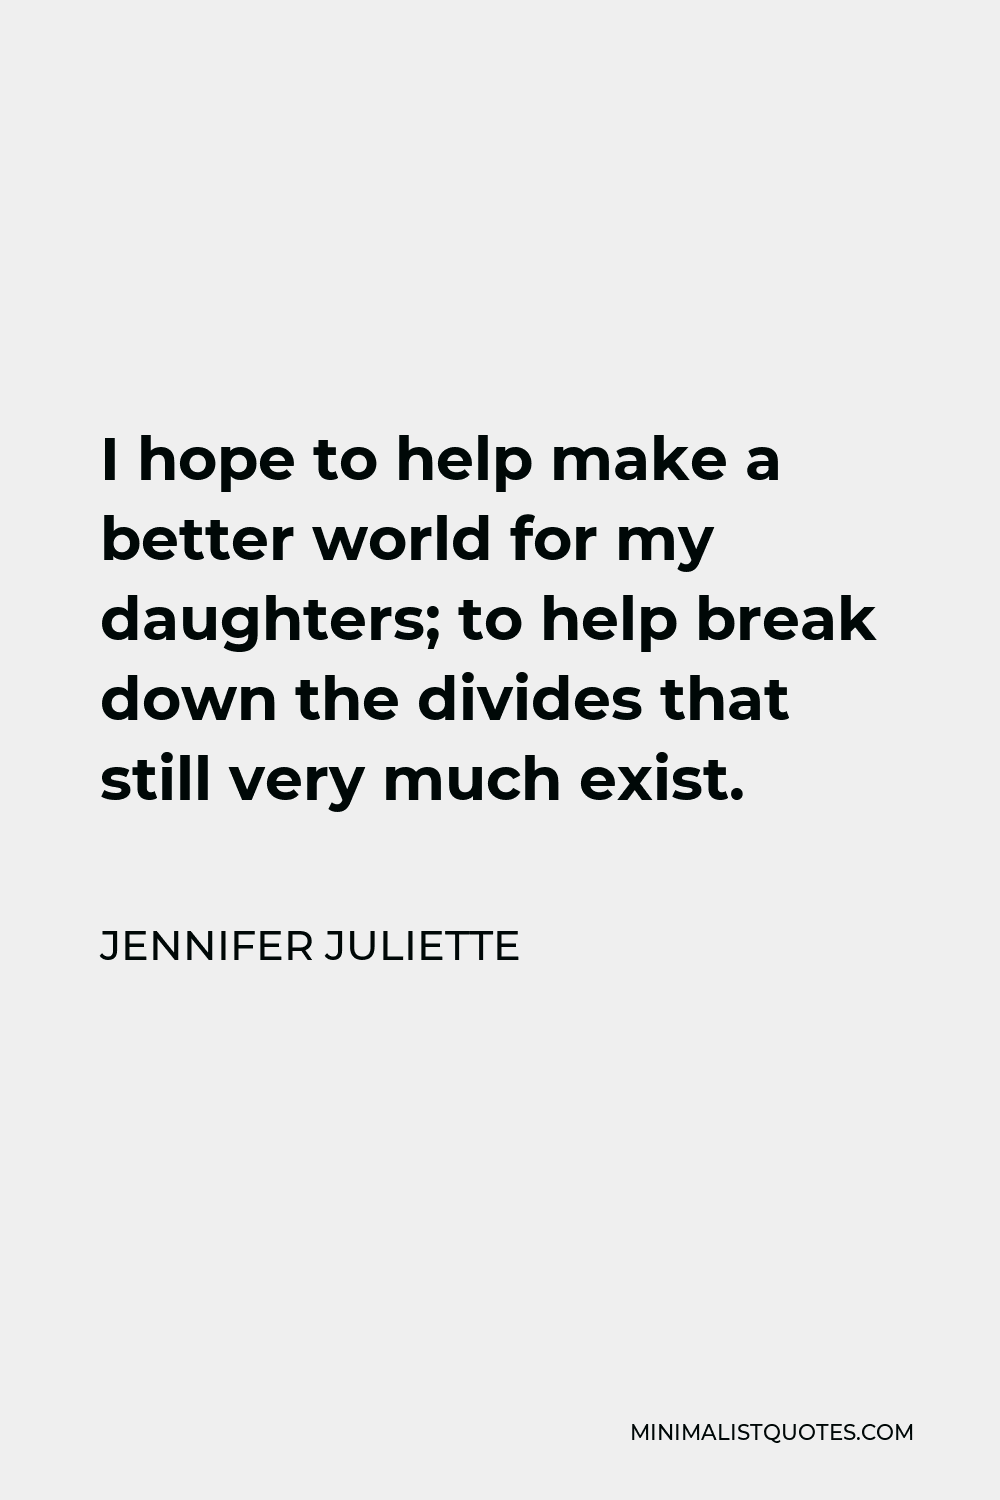 Jennifer Juliette Quote - I hope to help make a better world for my daughters; to help break down the divides that still very much exist.